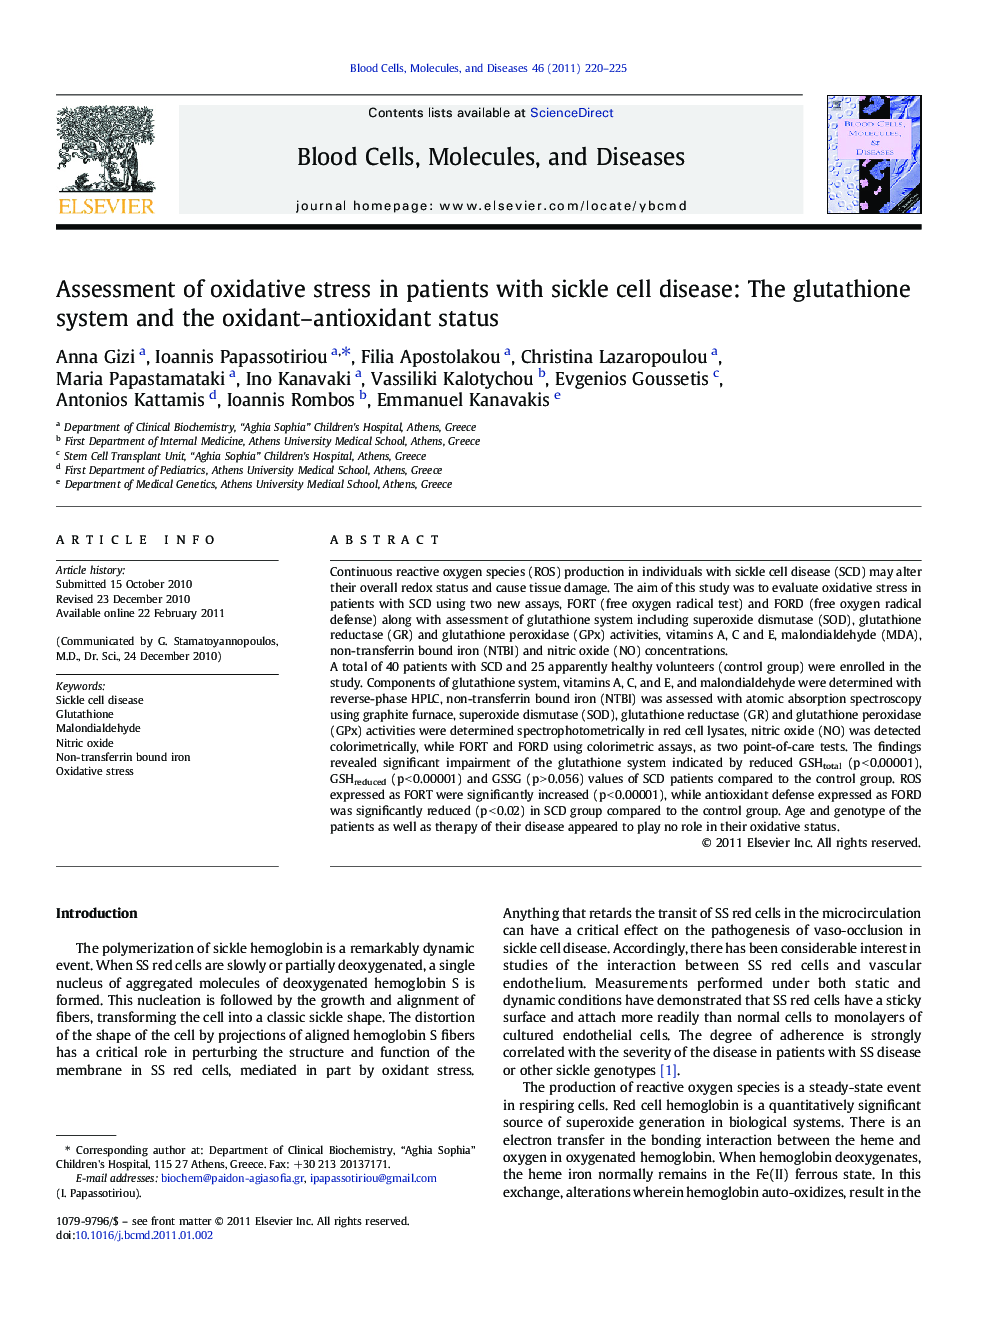 Assessment of oxidative stress in patients with sickle cell disease: The glutathione system and the oxidant-antioxidant status